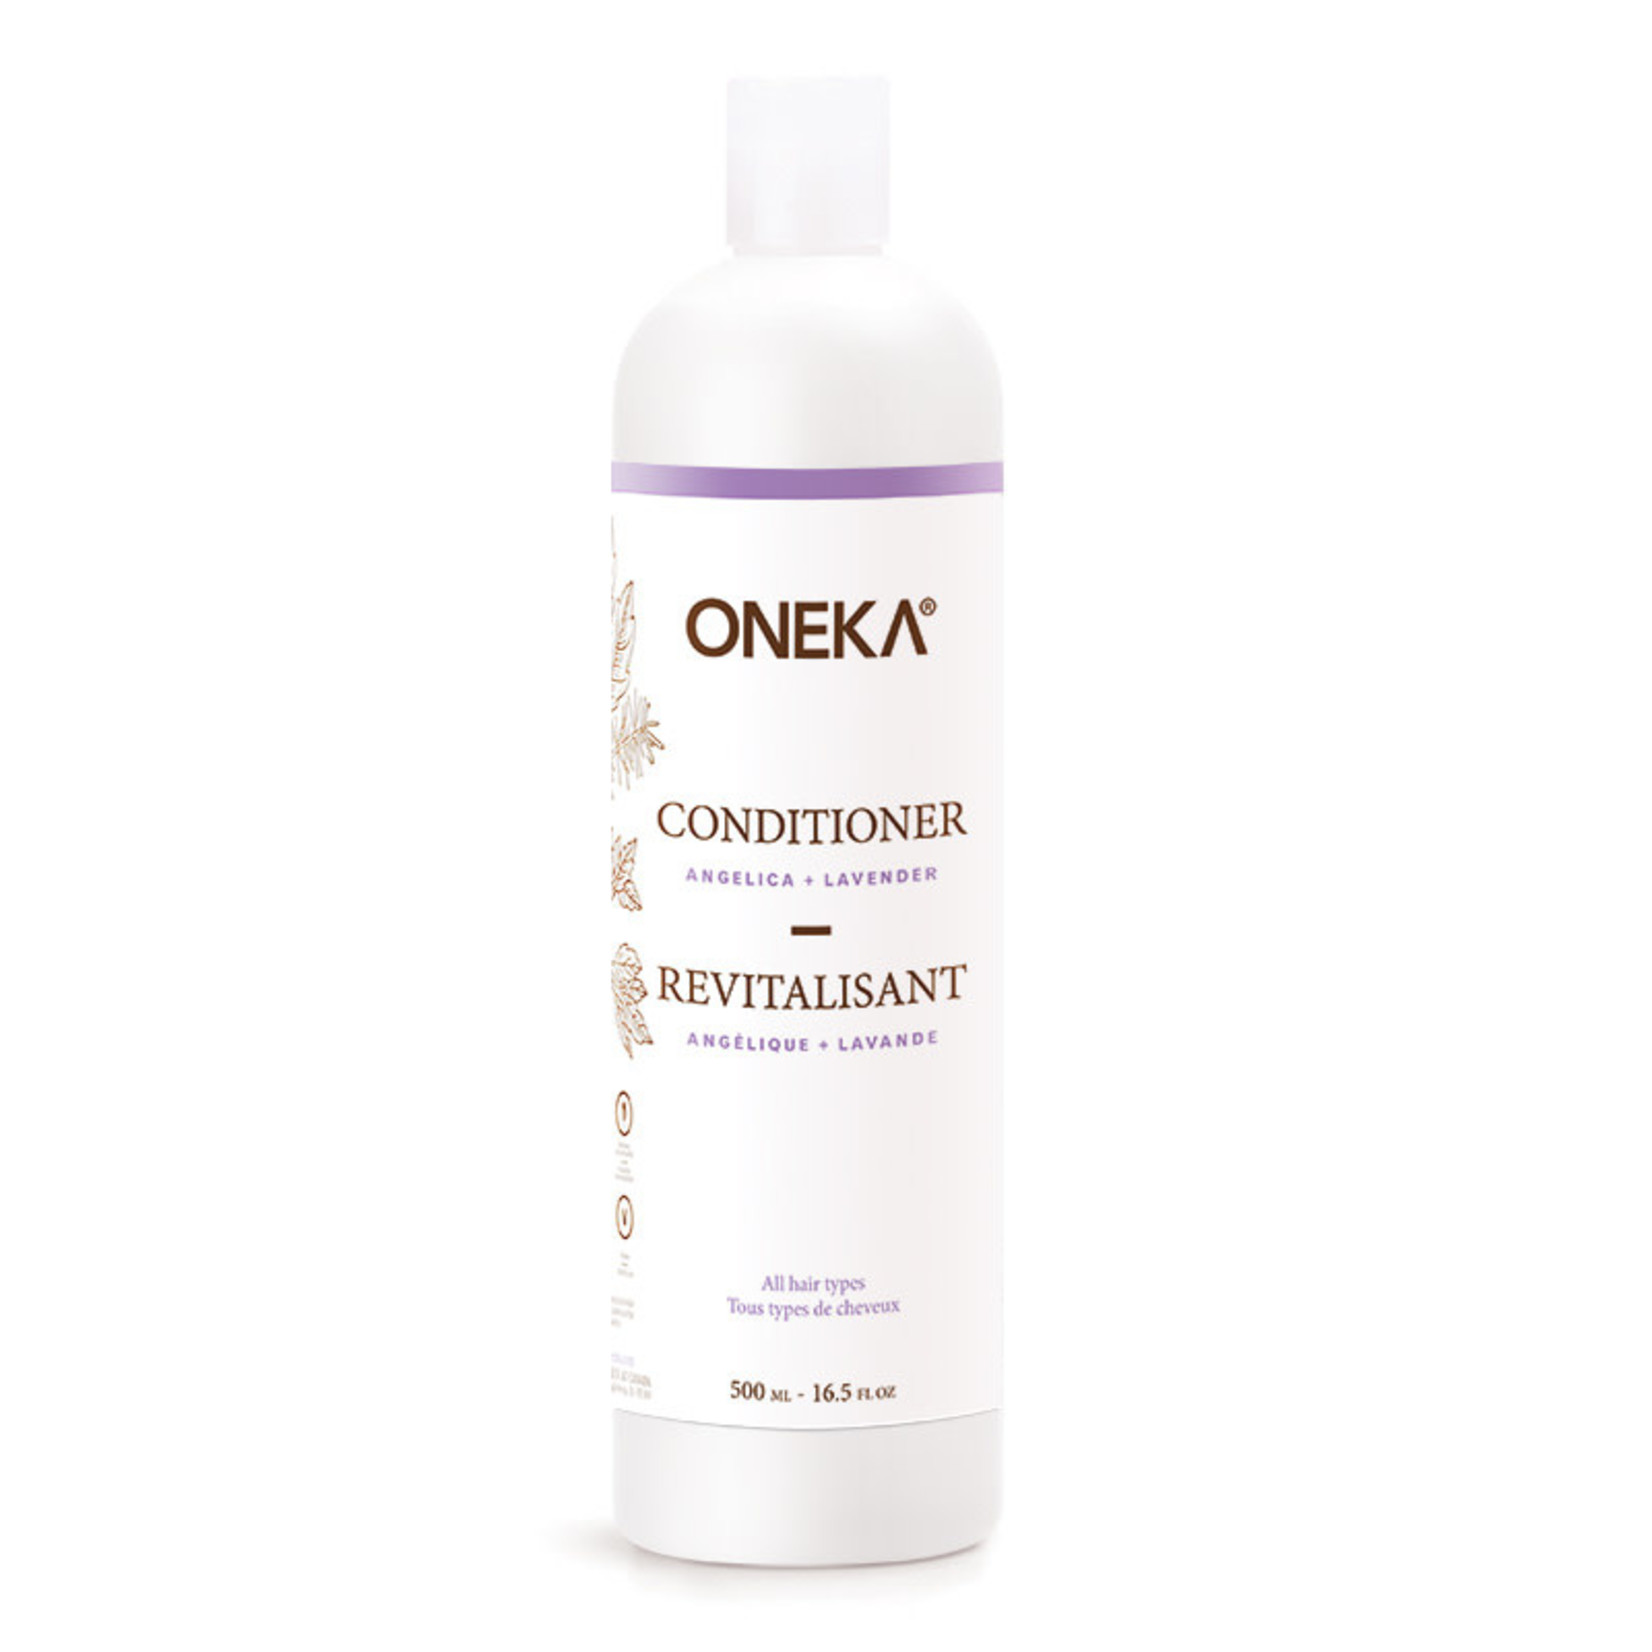 ONEKA ONEKA CONDITIONER ANGELICA & LAVENDER 500ML